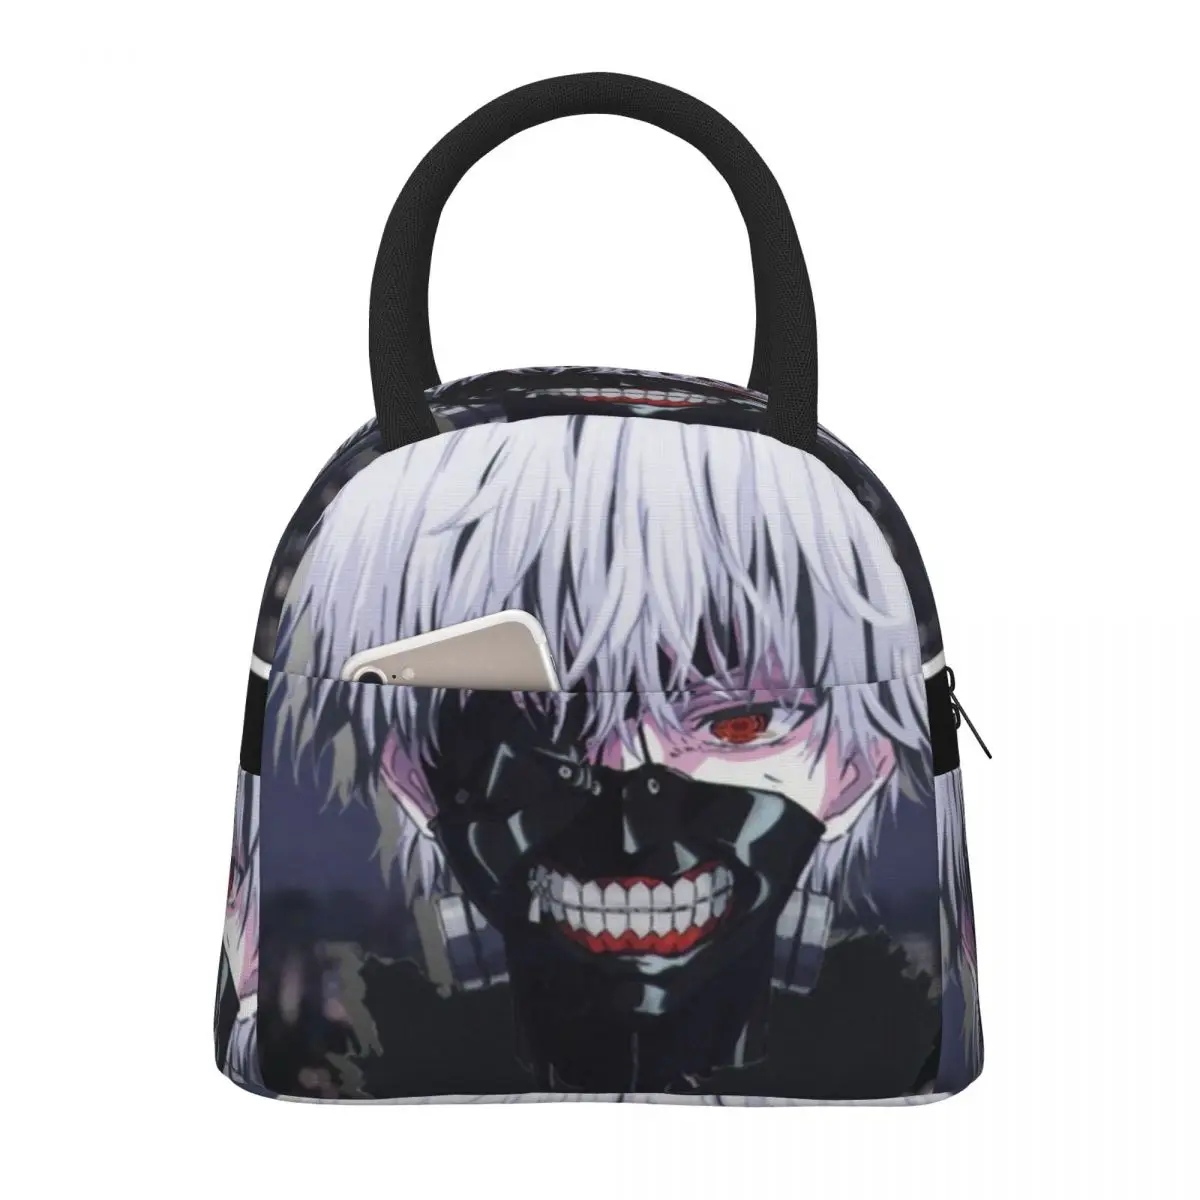 

Kaneki Ken On An Anime City Tokyo Ghoul Lunch Bag Aesthetic Lunch Box Travel Cooler Bag Oxford Graphic Design Tote Food Bags